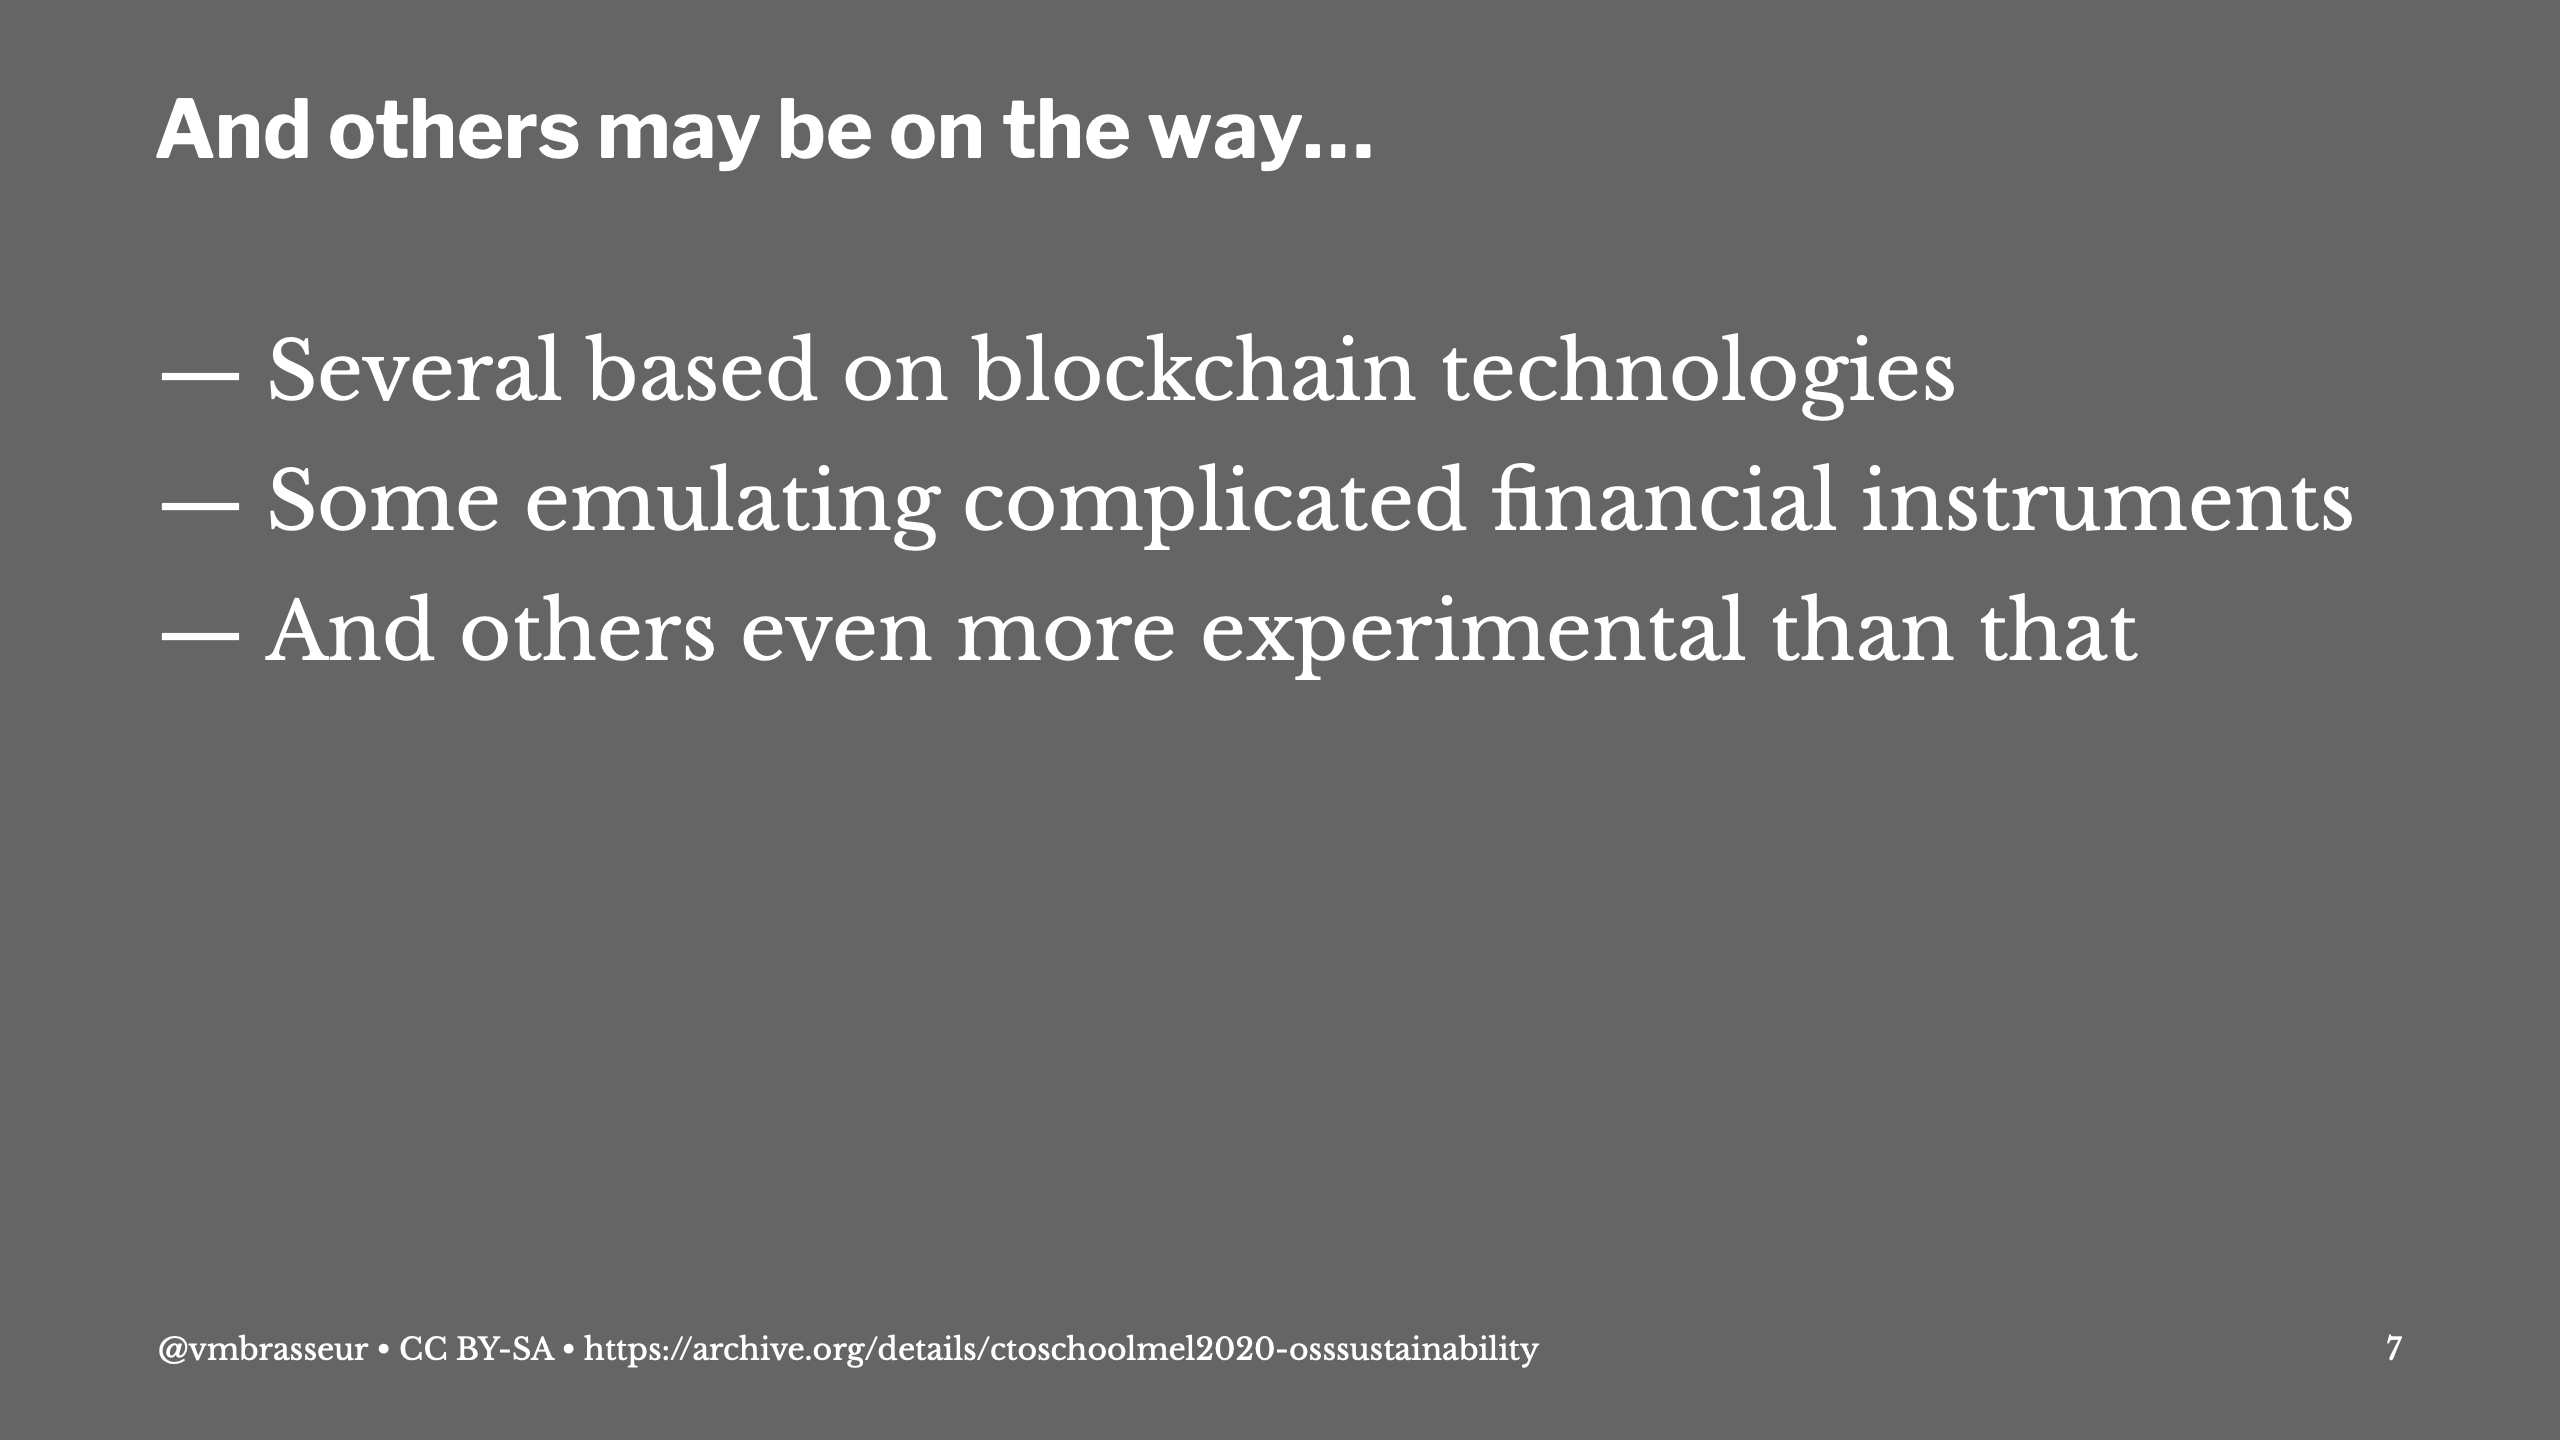 And several may be on the way; several based on blockchain technologies, some emulating complicated financial instruments, and even others more experimental than that